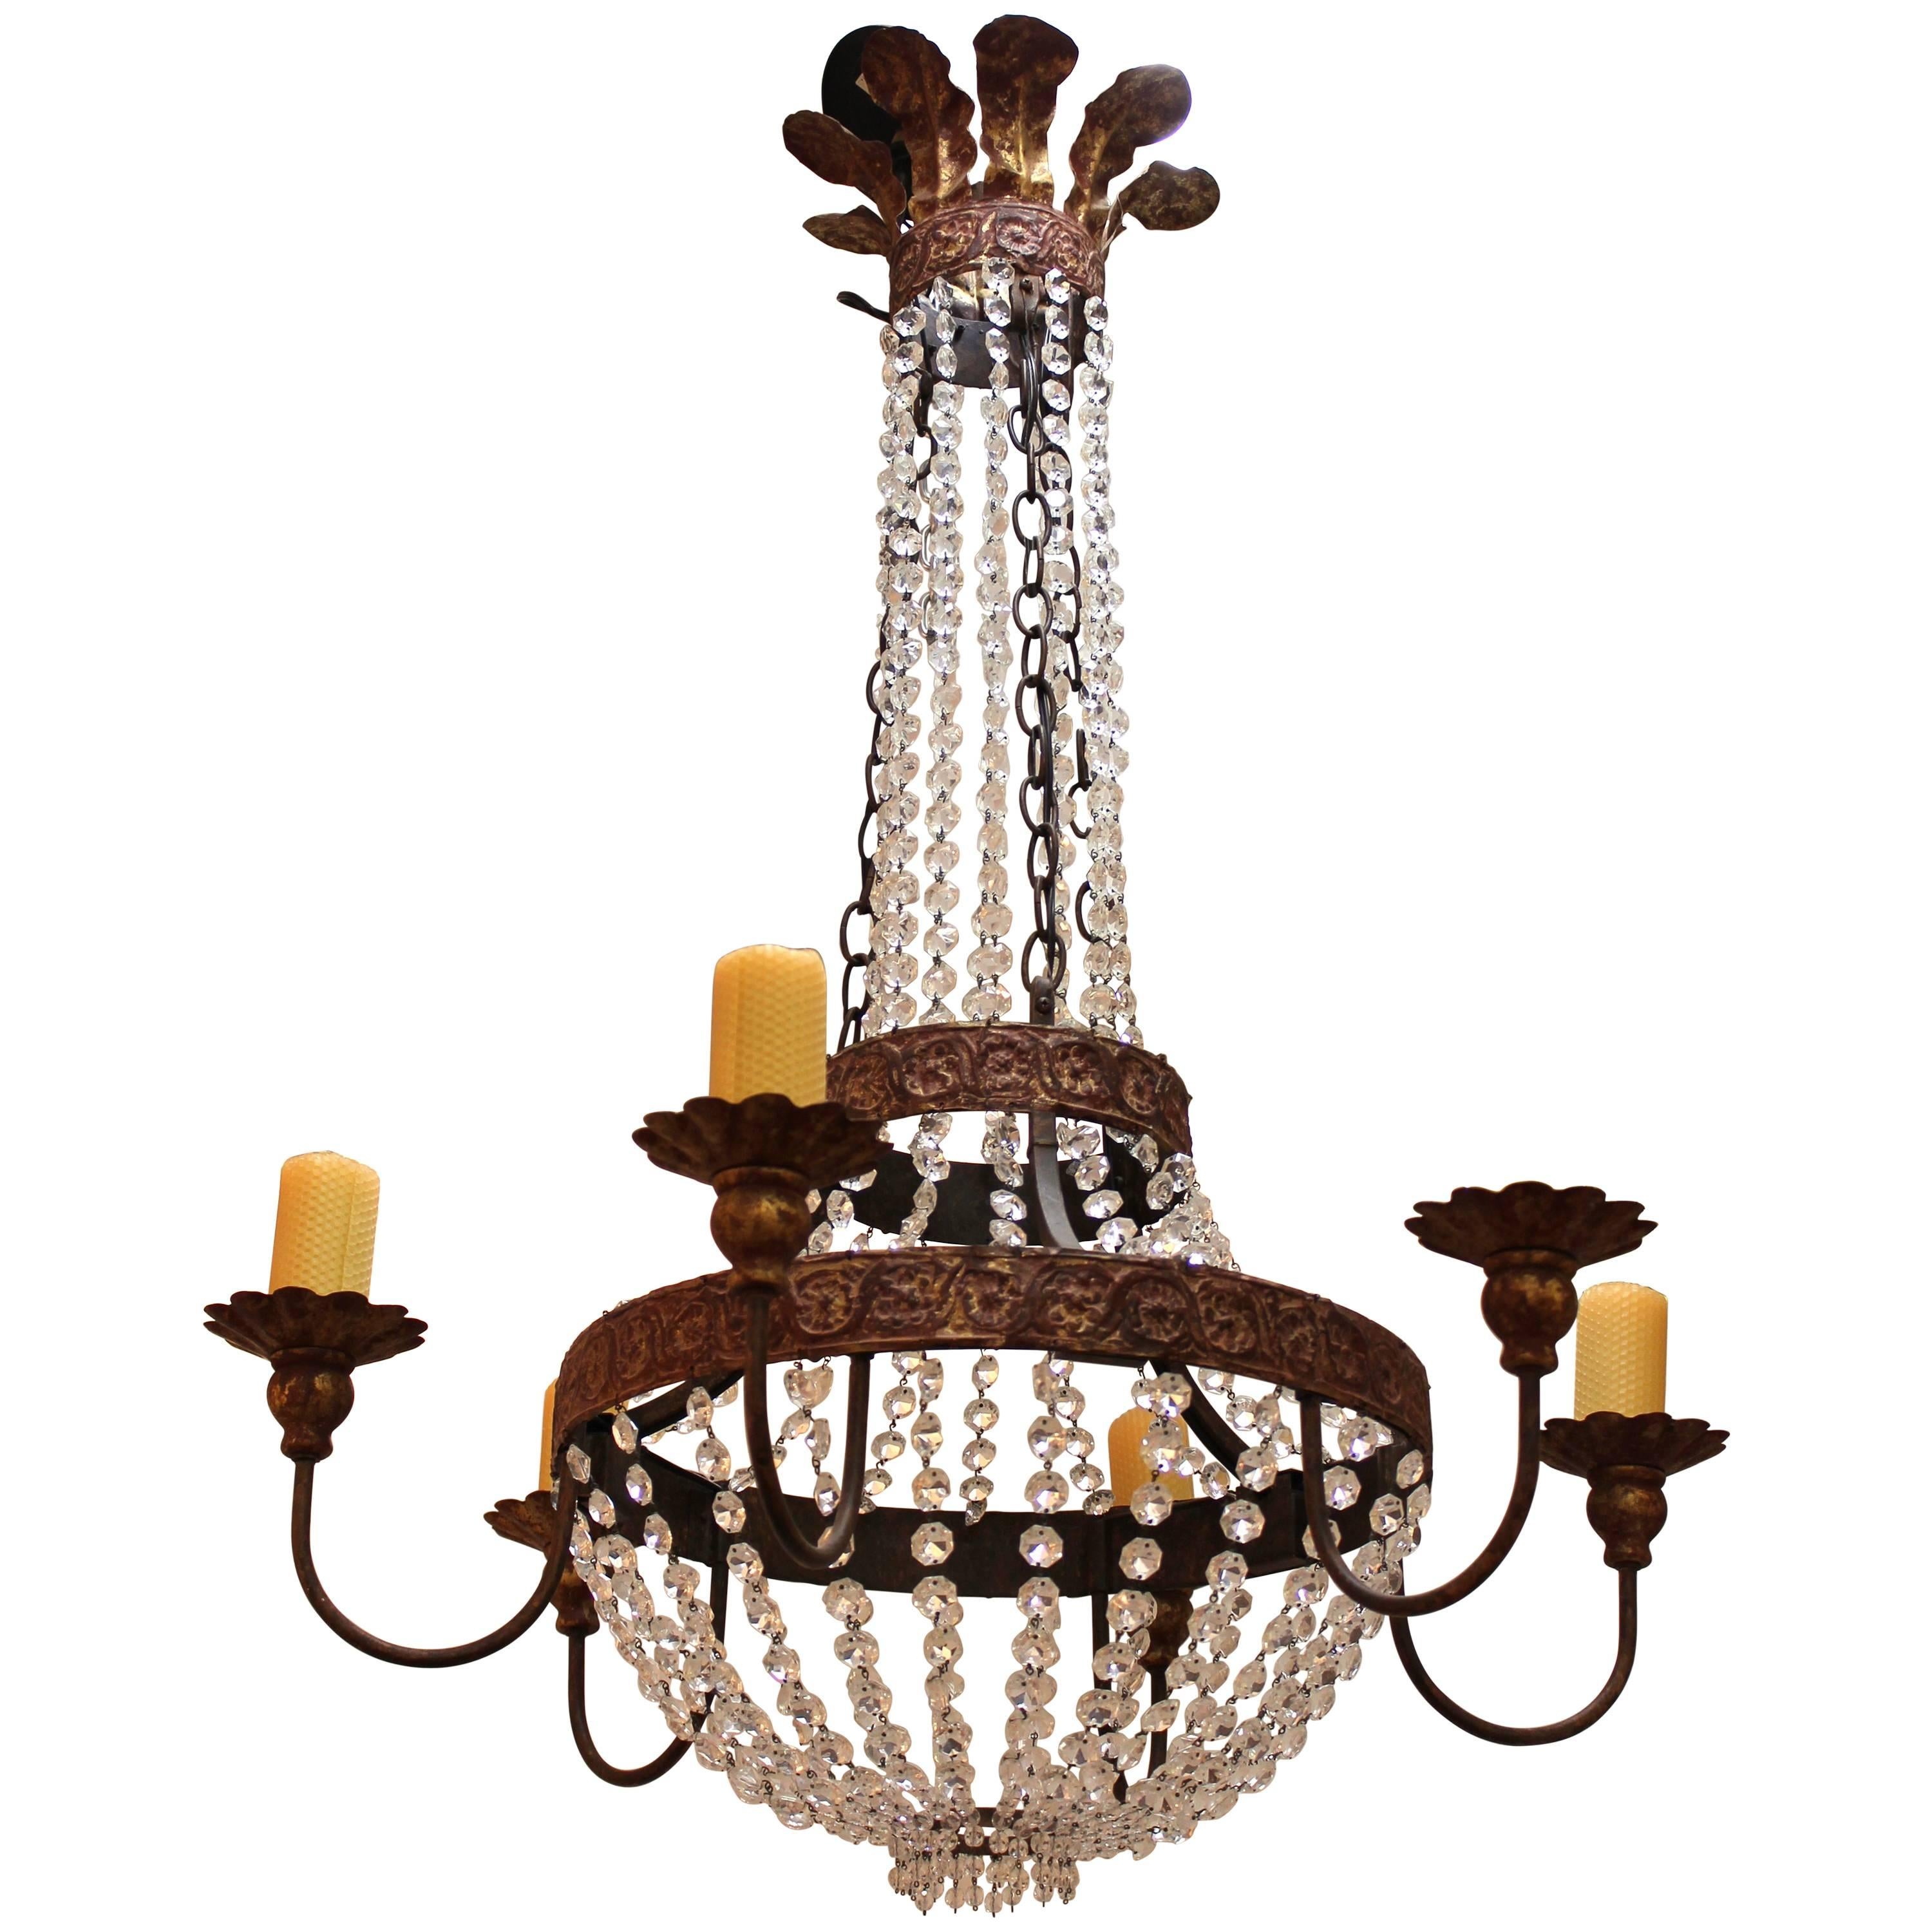 19th Century Style Chandelier with Candle-cupped Hidden Sockets